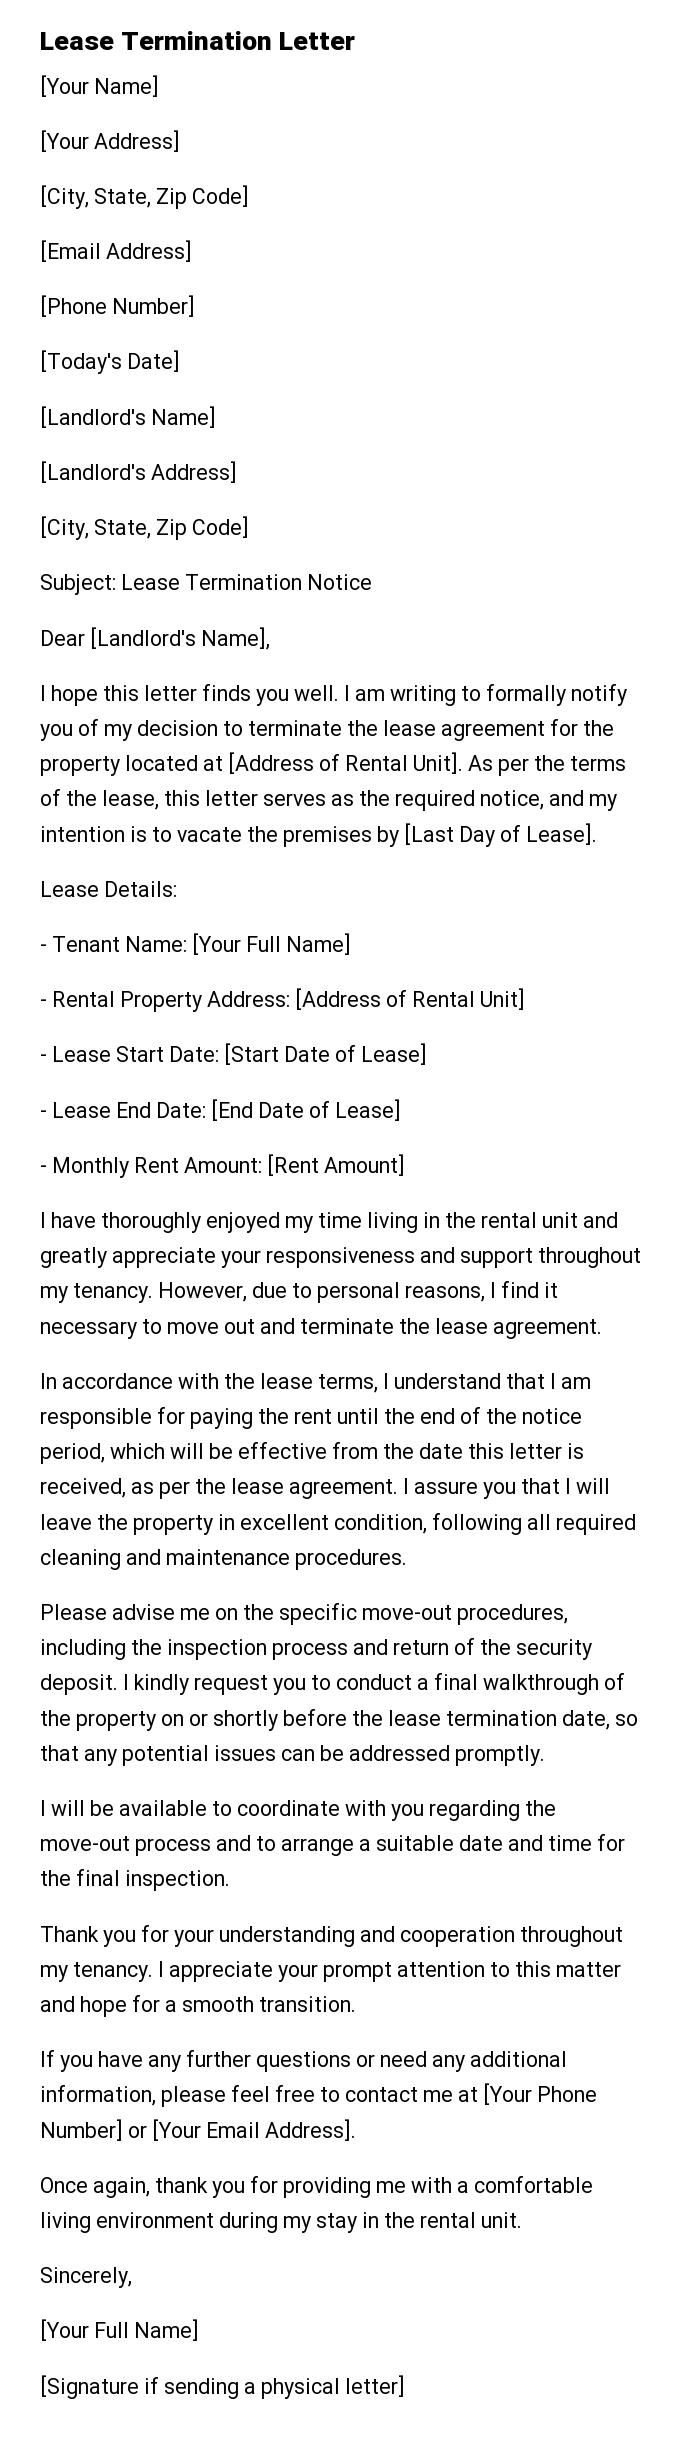 Lease Termination Letter